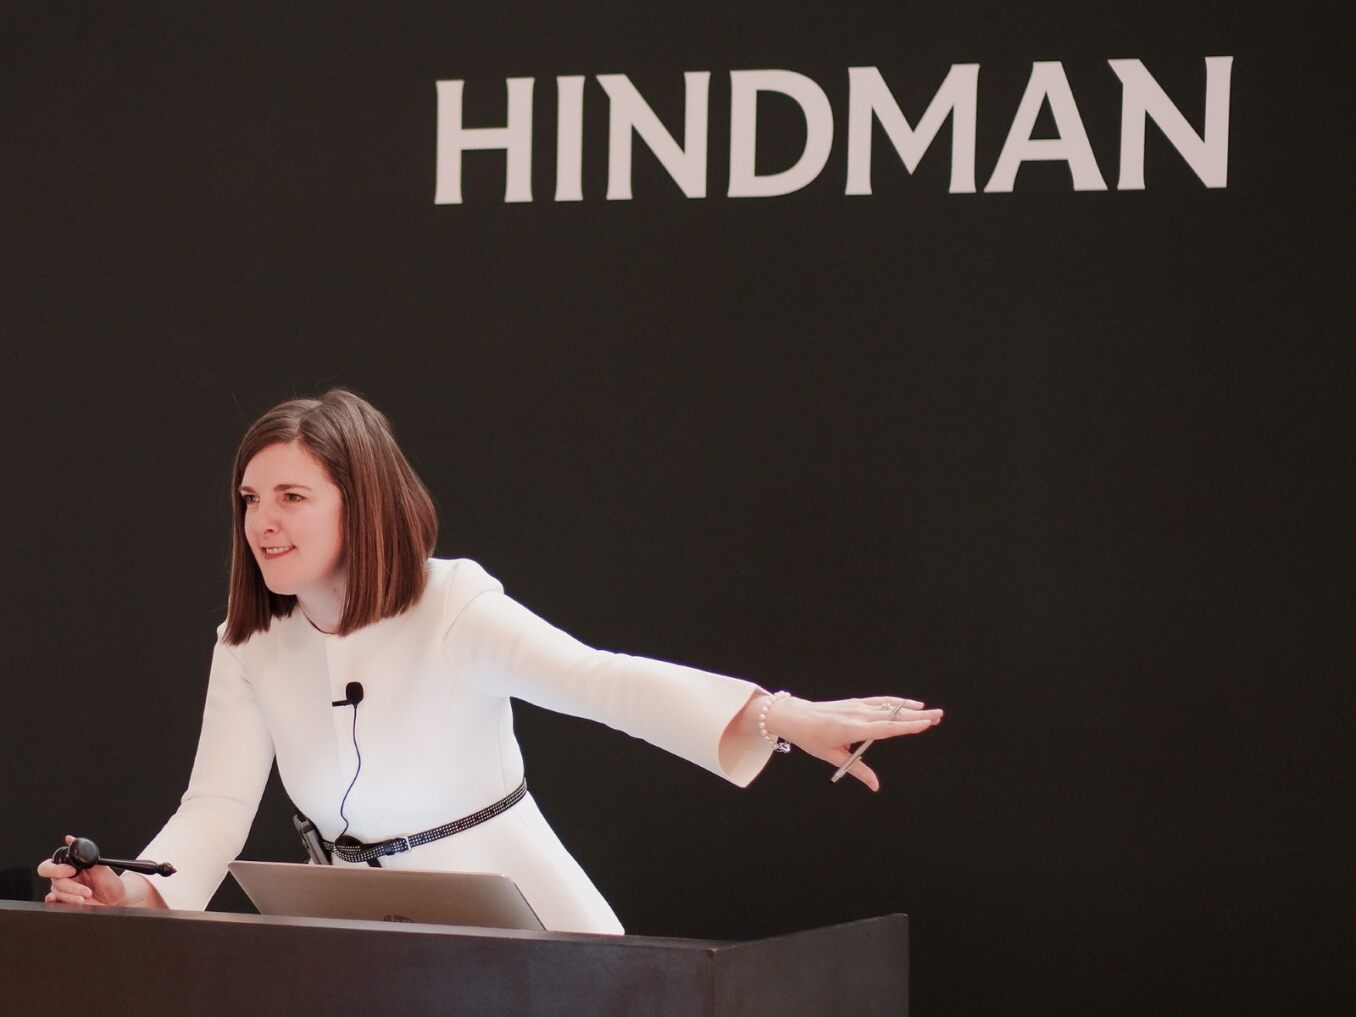 Gemma Sudlow on the rostrum for Hindman’s inaugural New York auction, Time & Space: Watches from the Collection of Glen de Vries. Image courtesy of Hindman